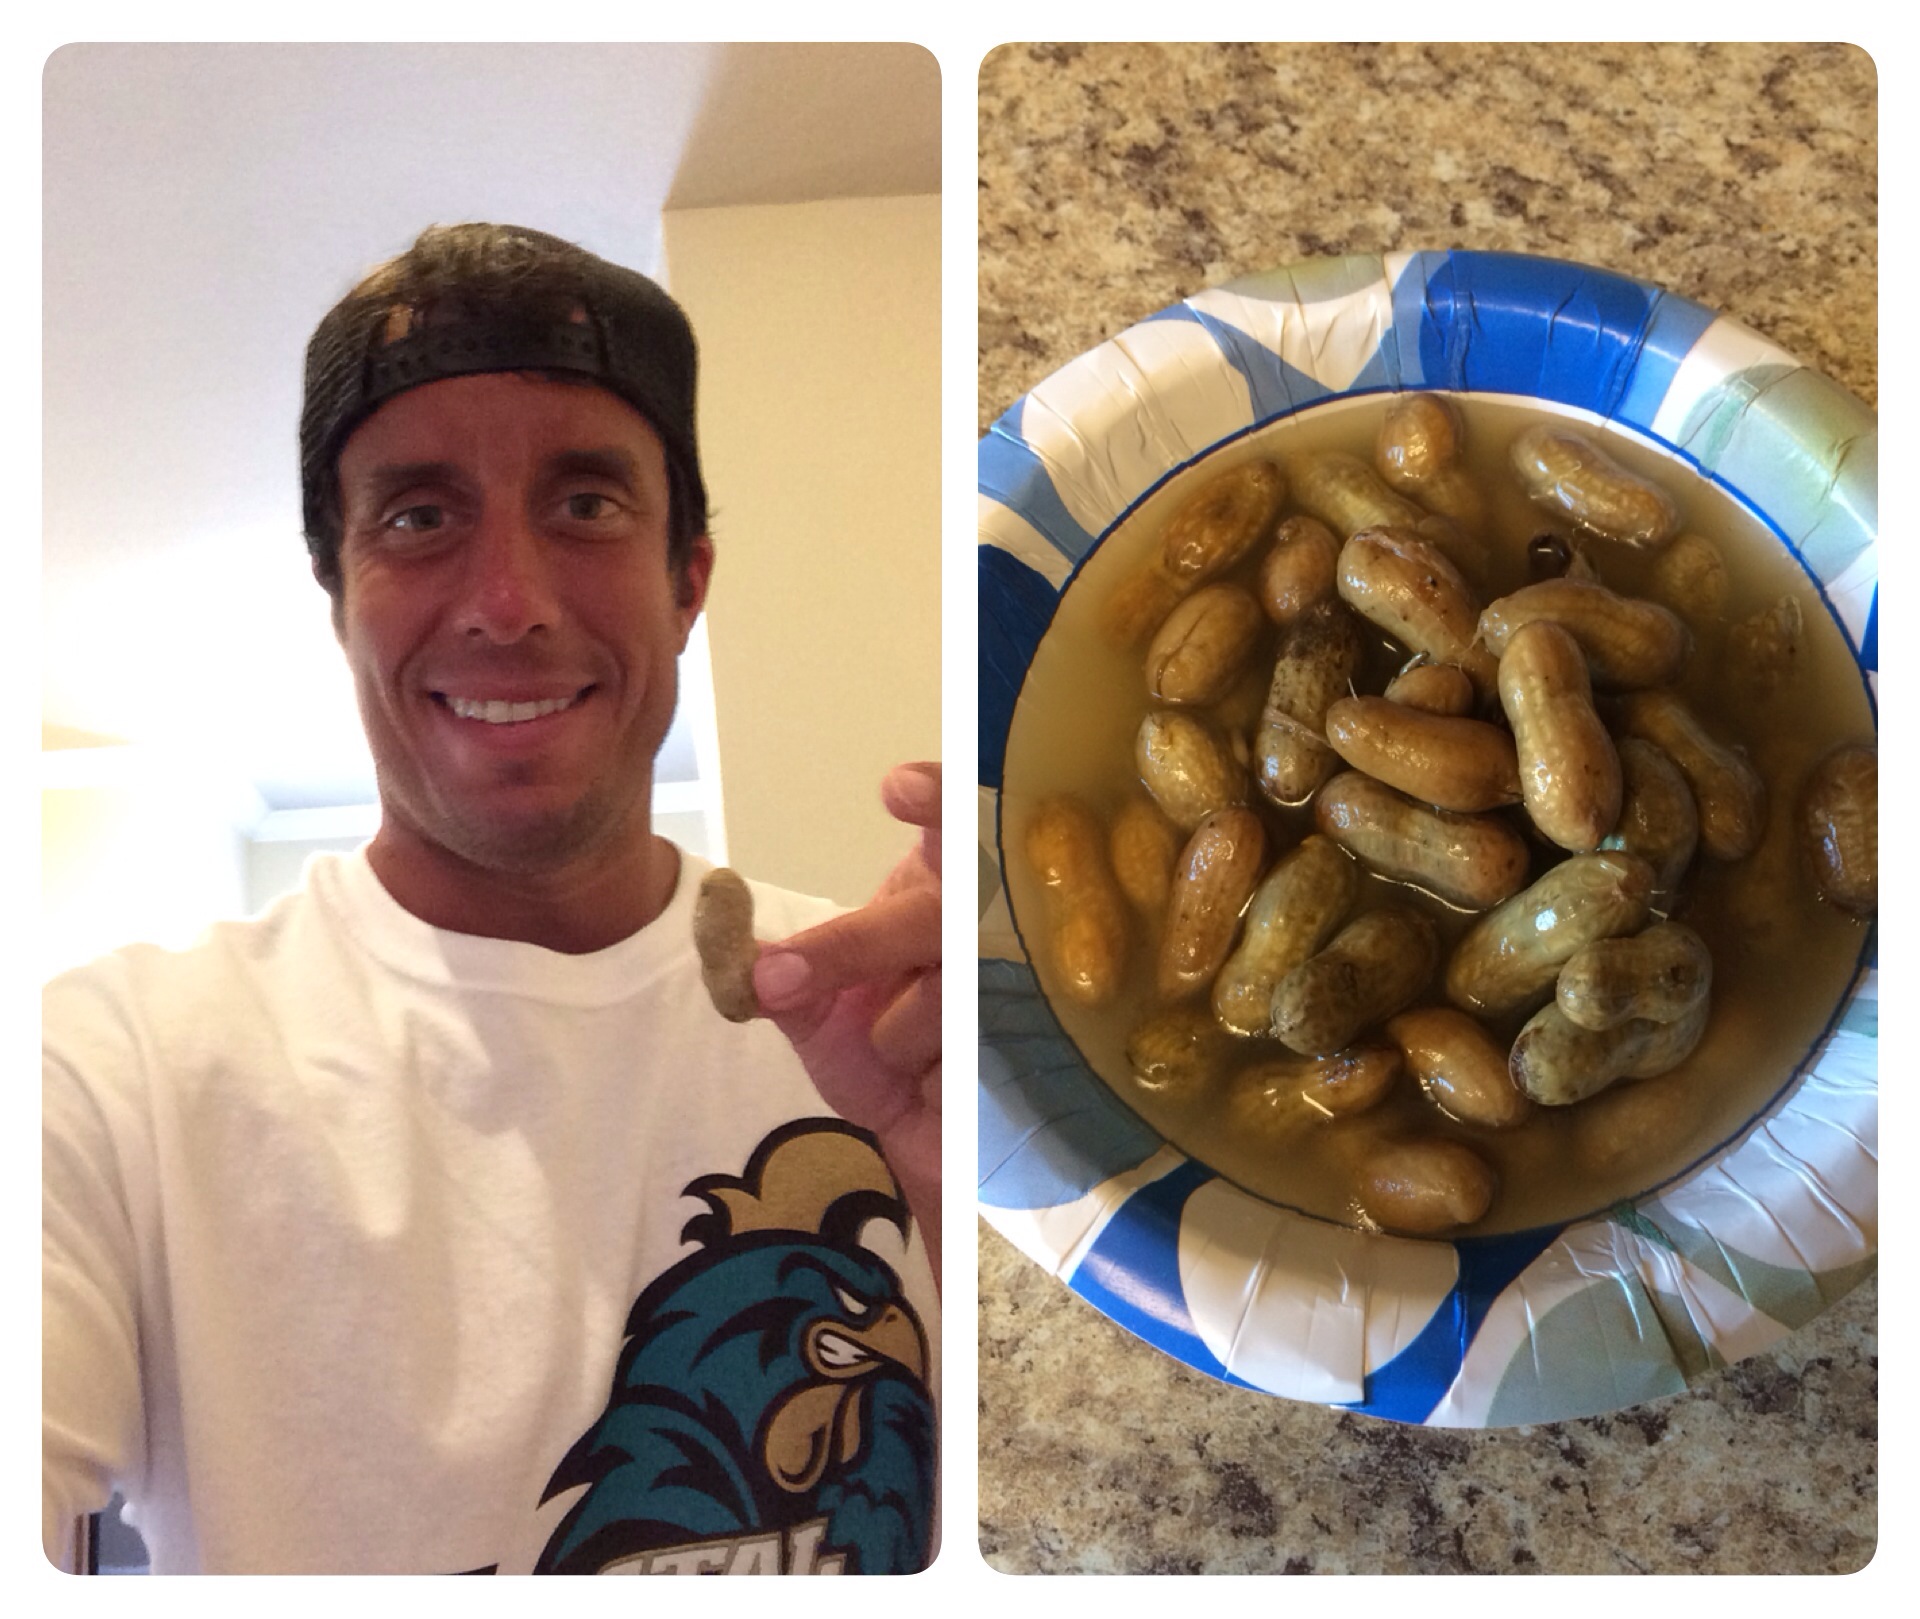 Yep, this is what boiled peanuts look like (hungry?).